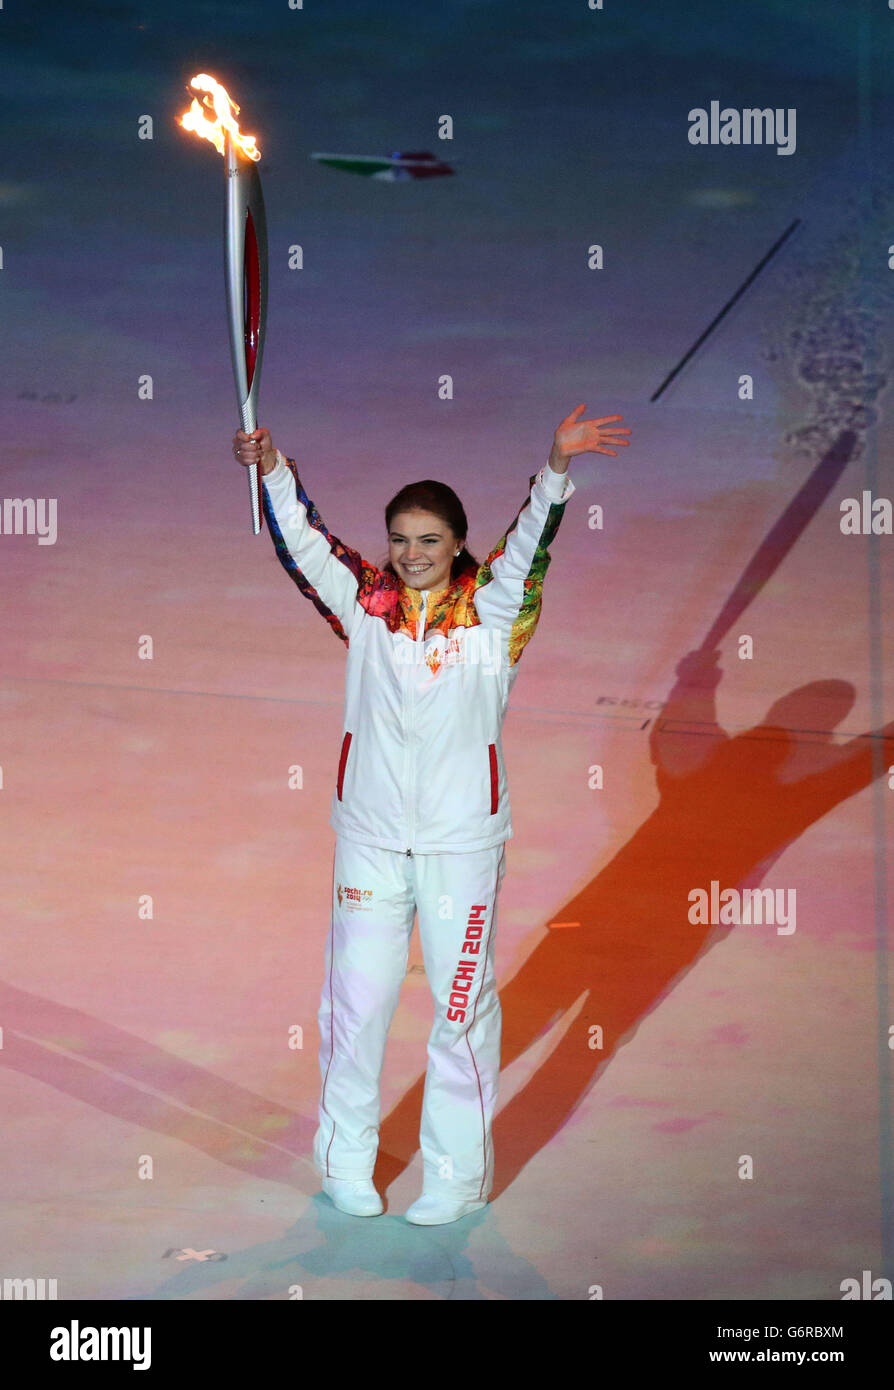 Russian gymnast Alina Kabaeva holds the torch during the Opening Ceremony for the 2014 Sochi Olympic Games at the Fisht Olympic Stadium, near Sochi, Russia. Stock Photo